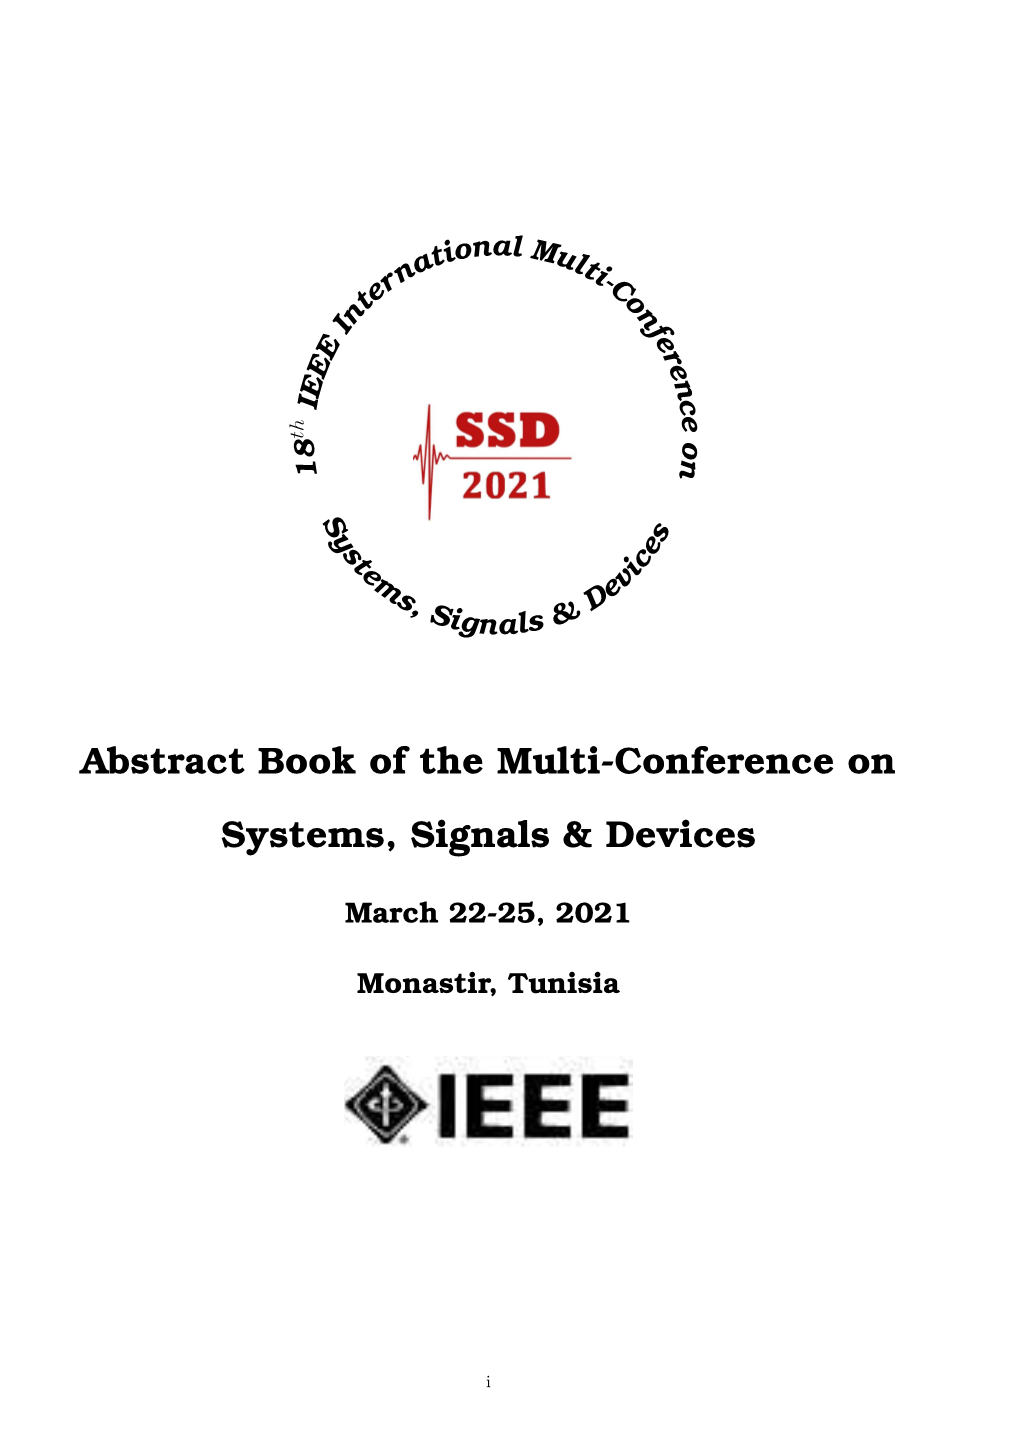 Abstract Book of the Multi-Conference on Systems, Signals & Devices